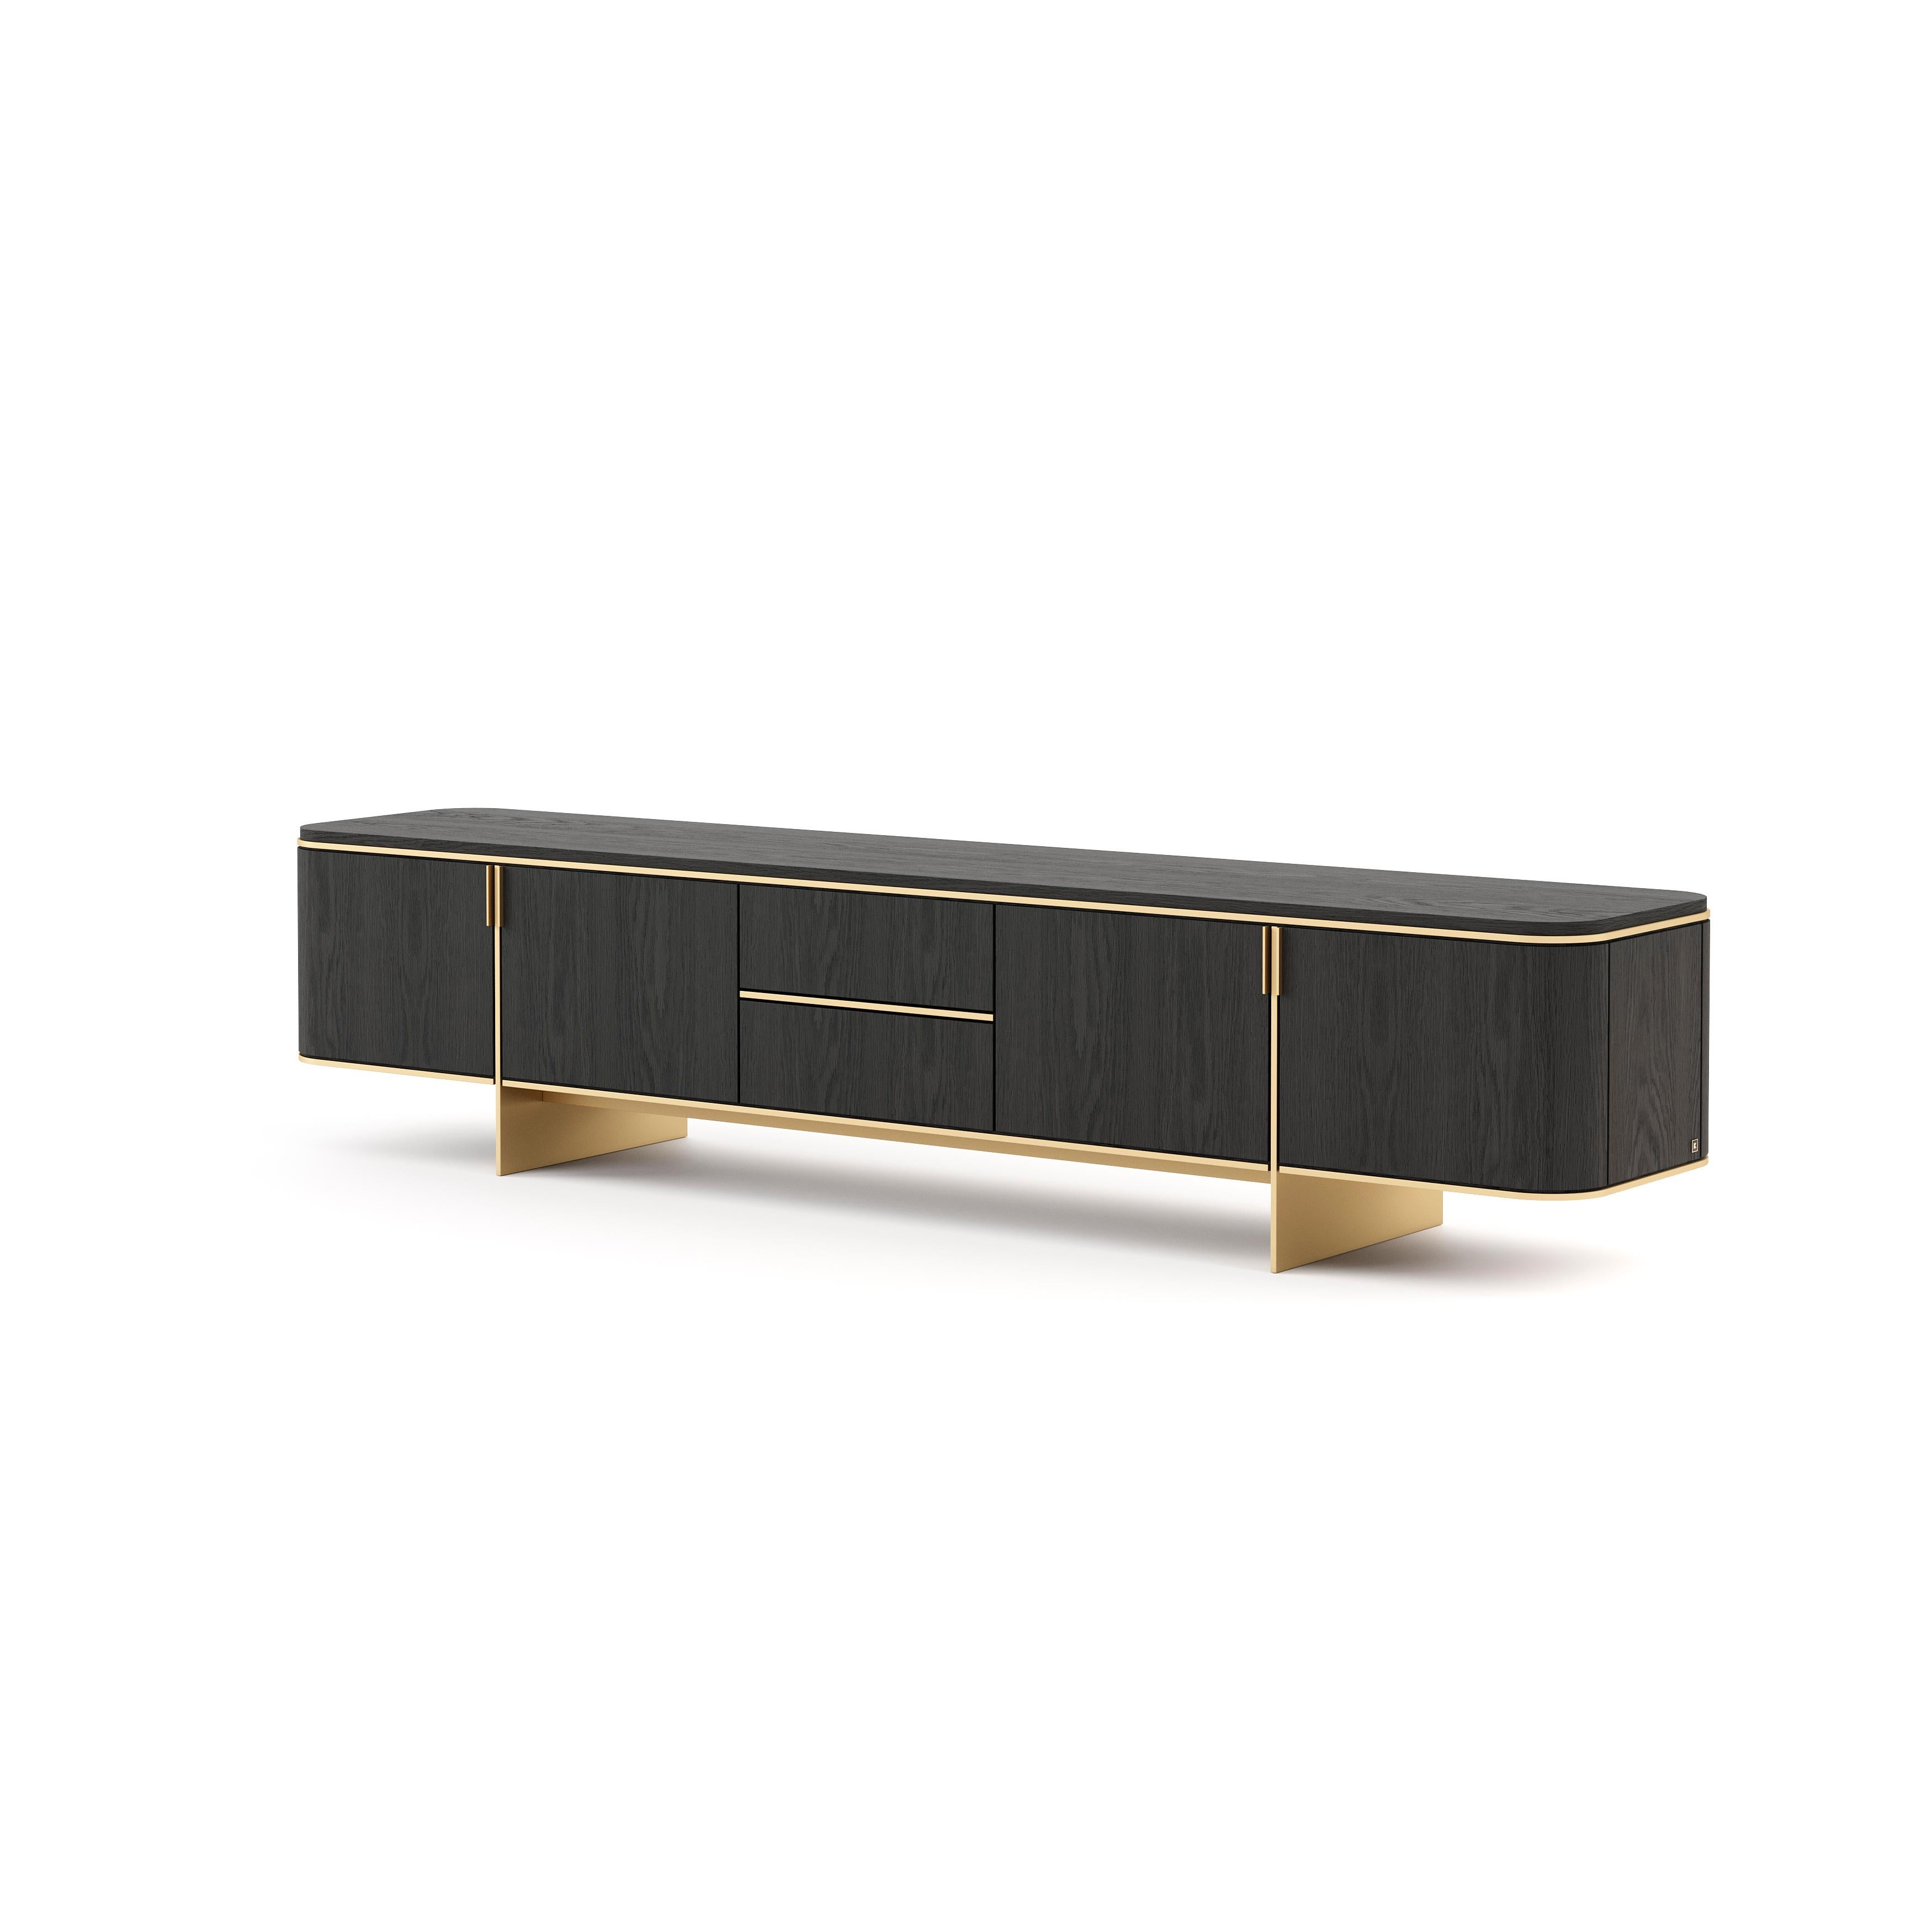 The Dean TV cabinet is a mid-century piece that exhales charm. The golden stainless steel brings a luxury touch to this piece and creates a balanced contrast with the dark wood.

* Available in different finishes.
** Other custom sizes upon